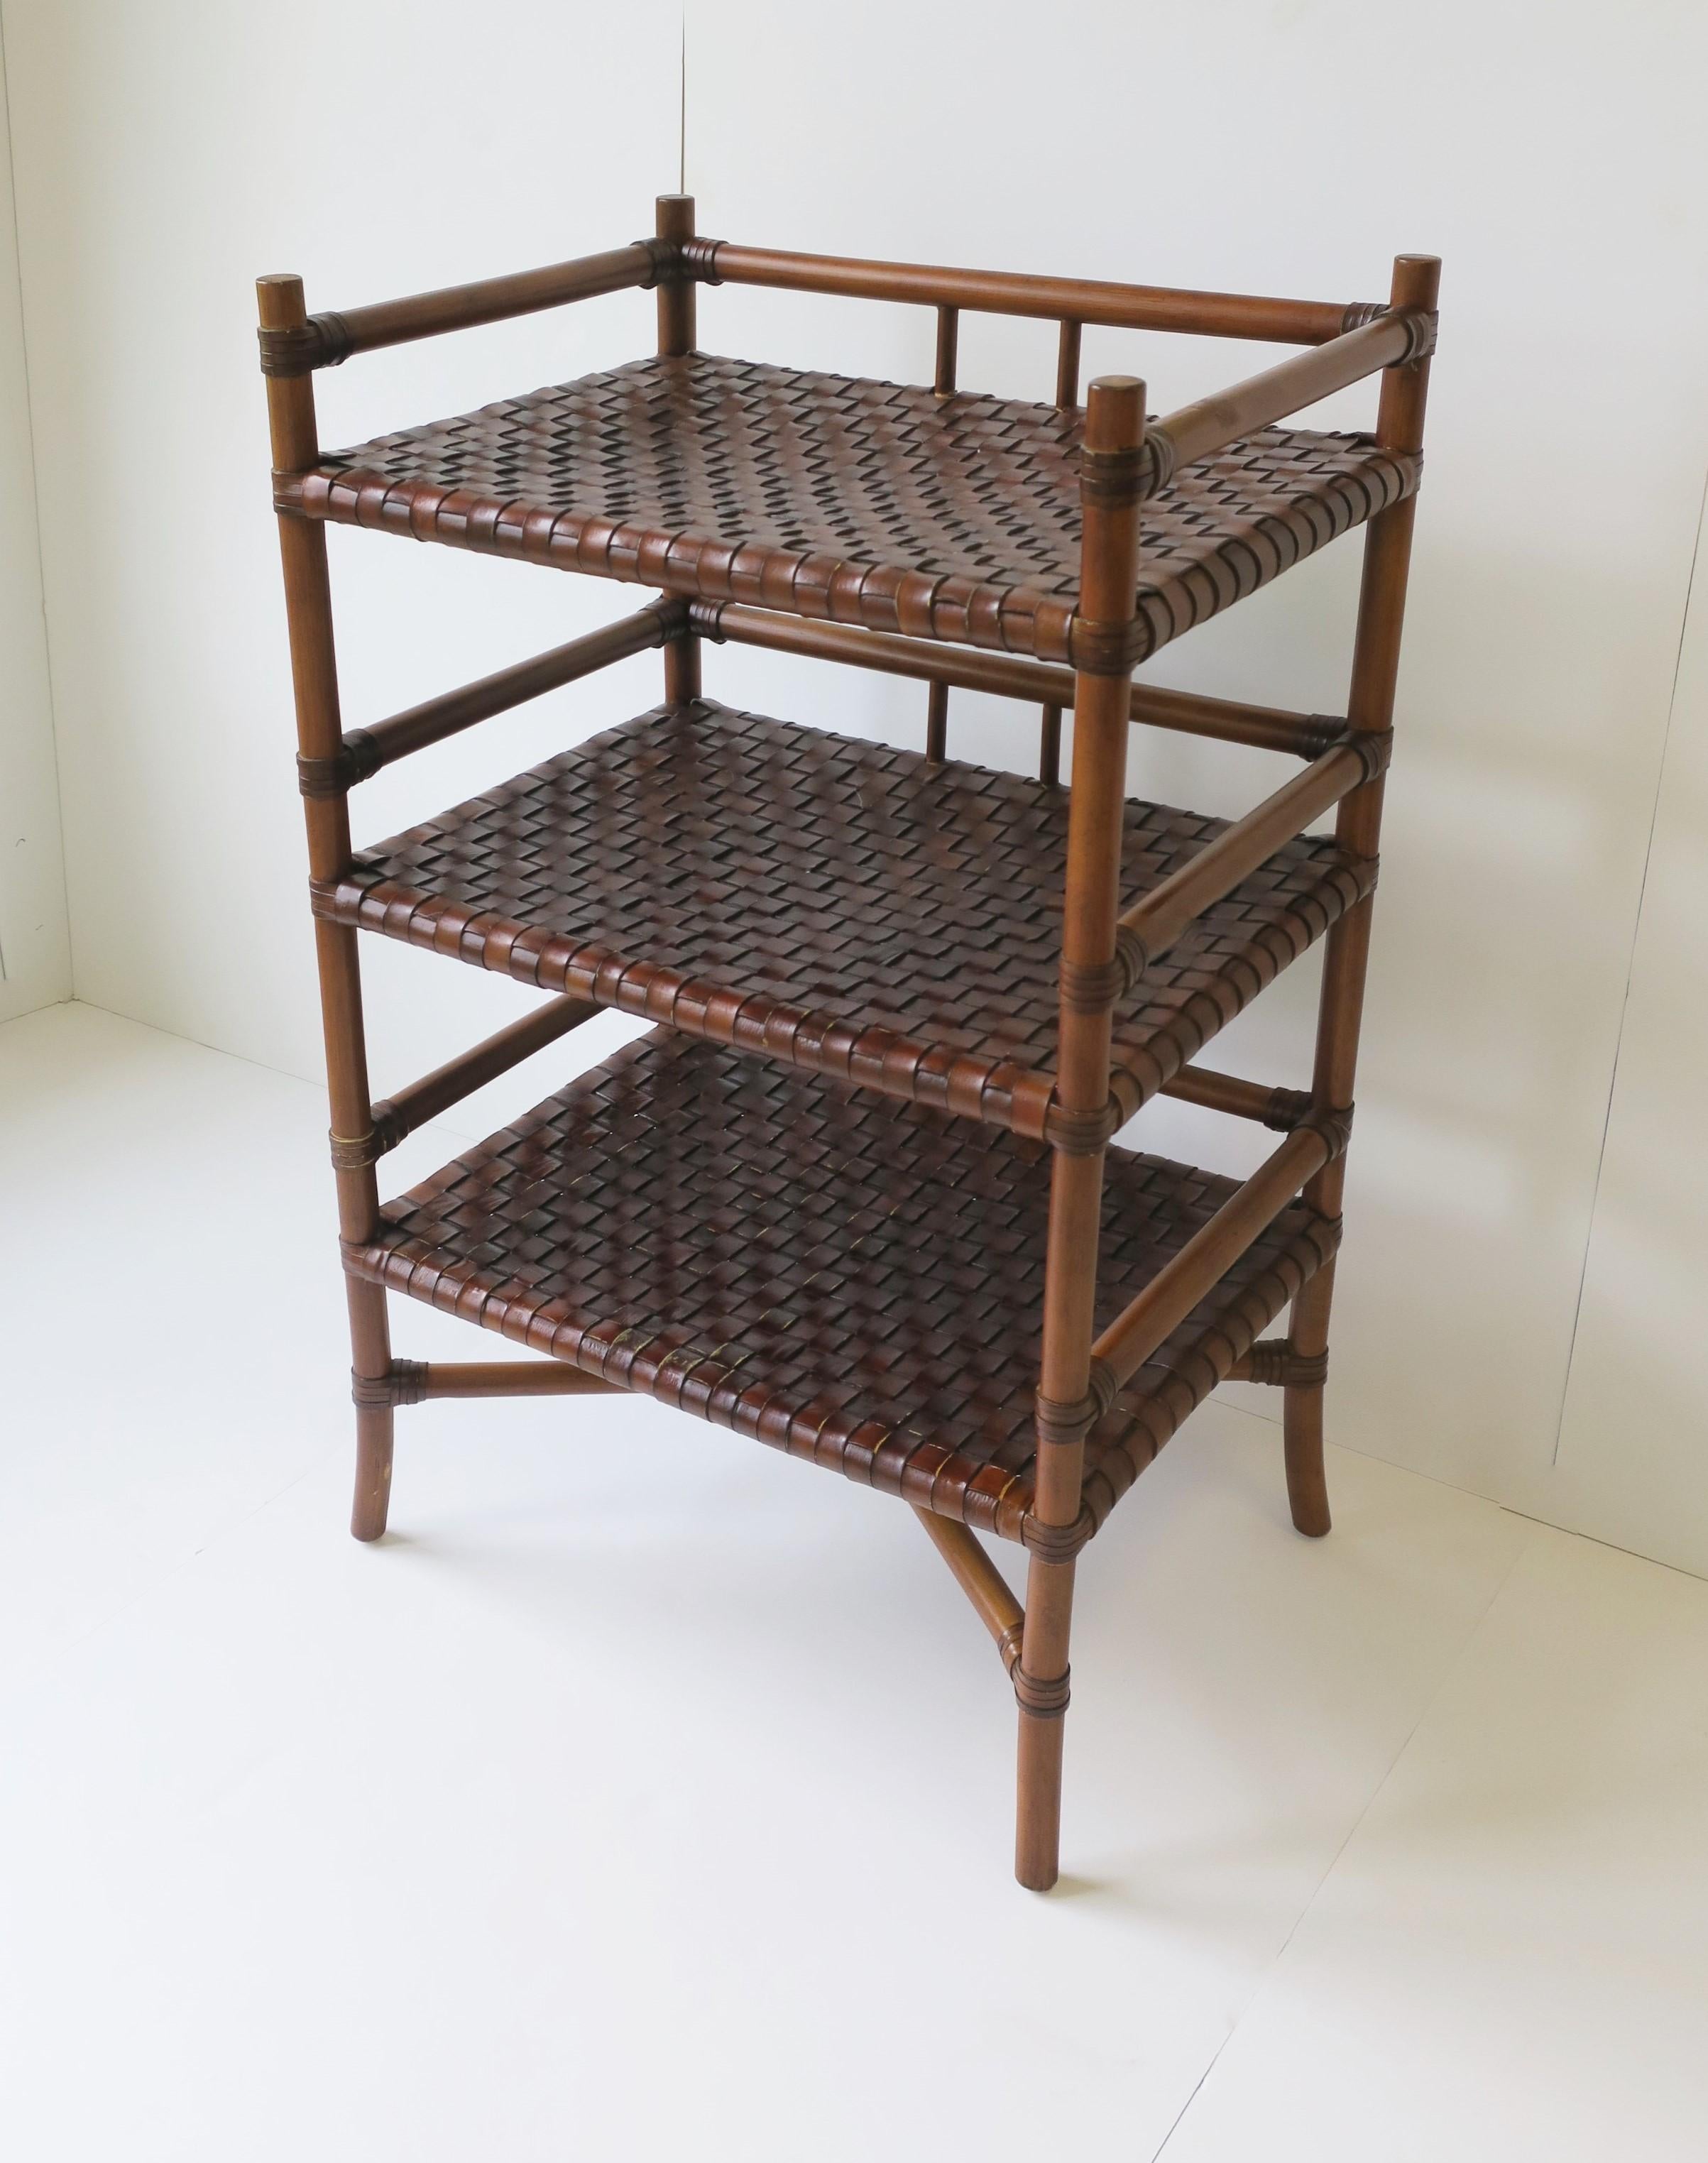 A three (3) tier rich brown storage Étagère, rack or stand, with weaved leather shelves, circa late-20th century. Étagère/storage stand has a rattan-style frame with three (3) shelves made of brown woven leather, wrapped leather detail on frame, and